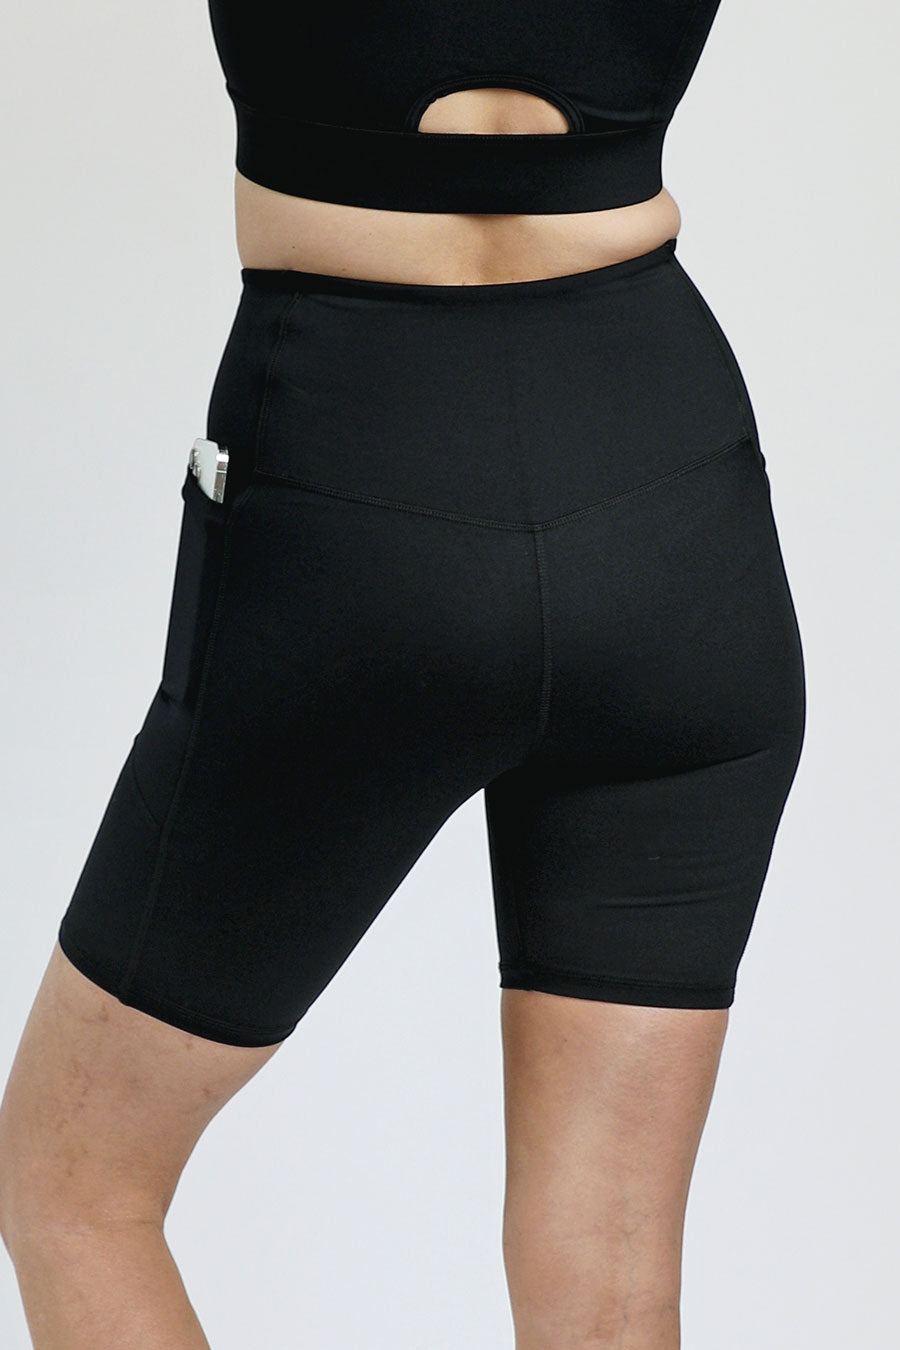 Core Pocket Bike Short - Black from Active Truth™
